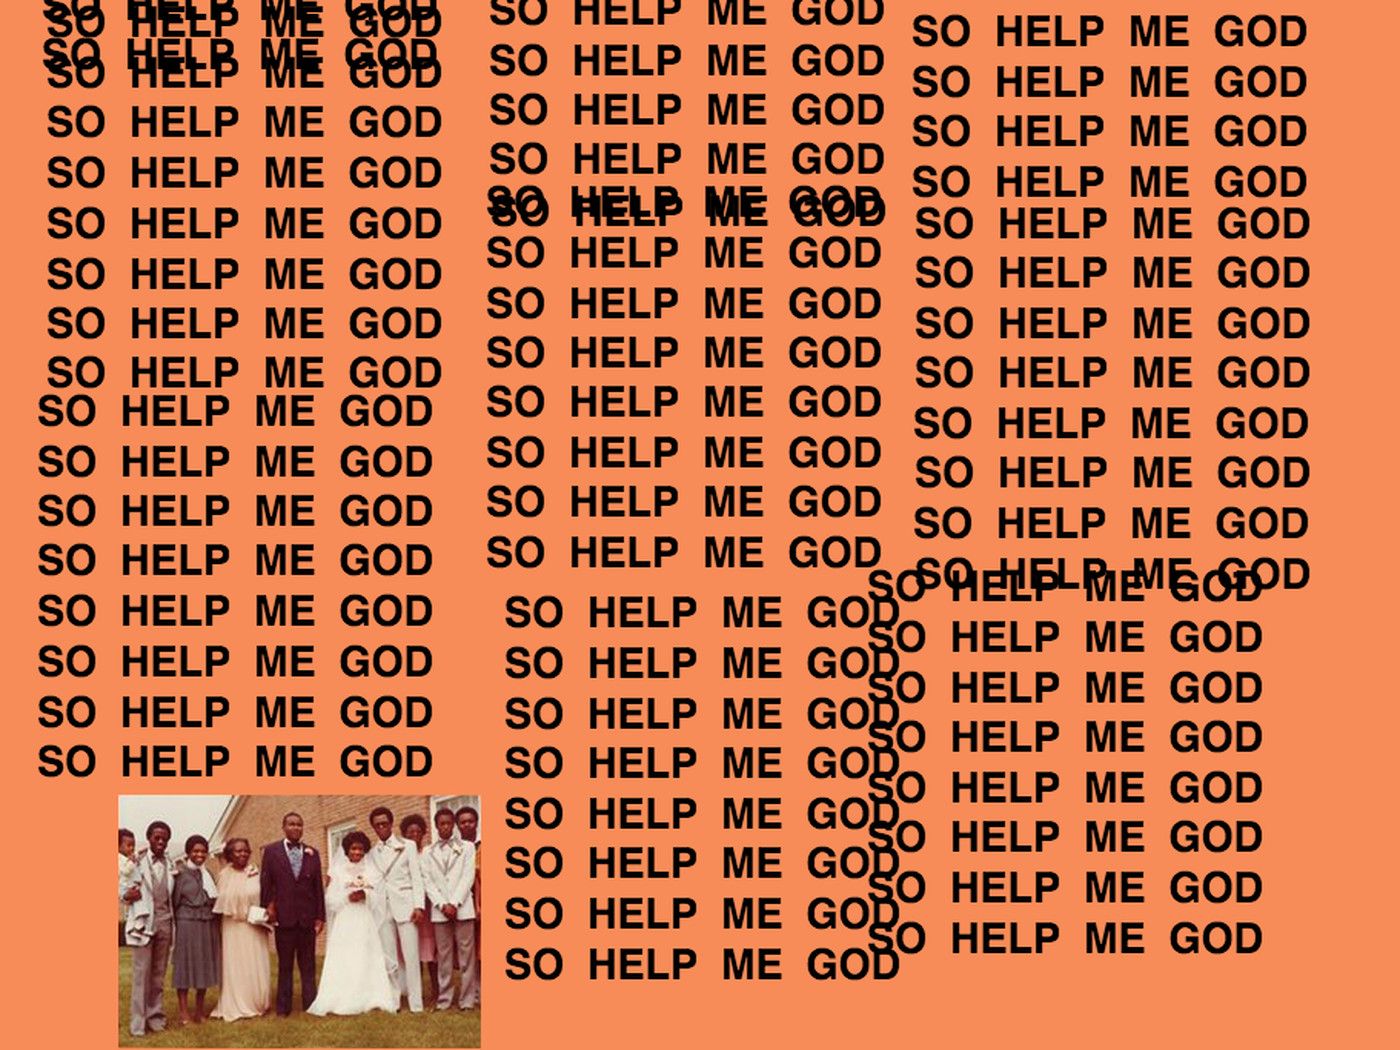 Create your own The Life of Pablo album cover